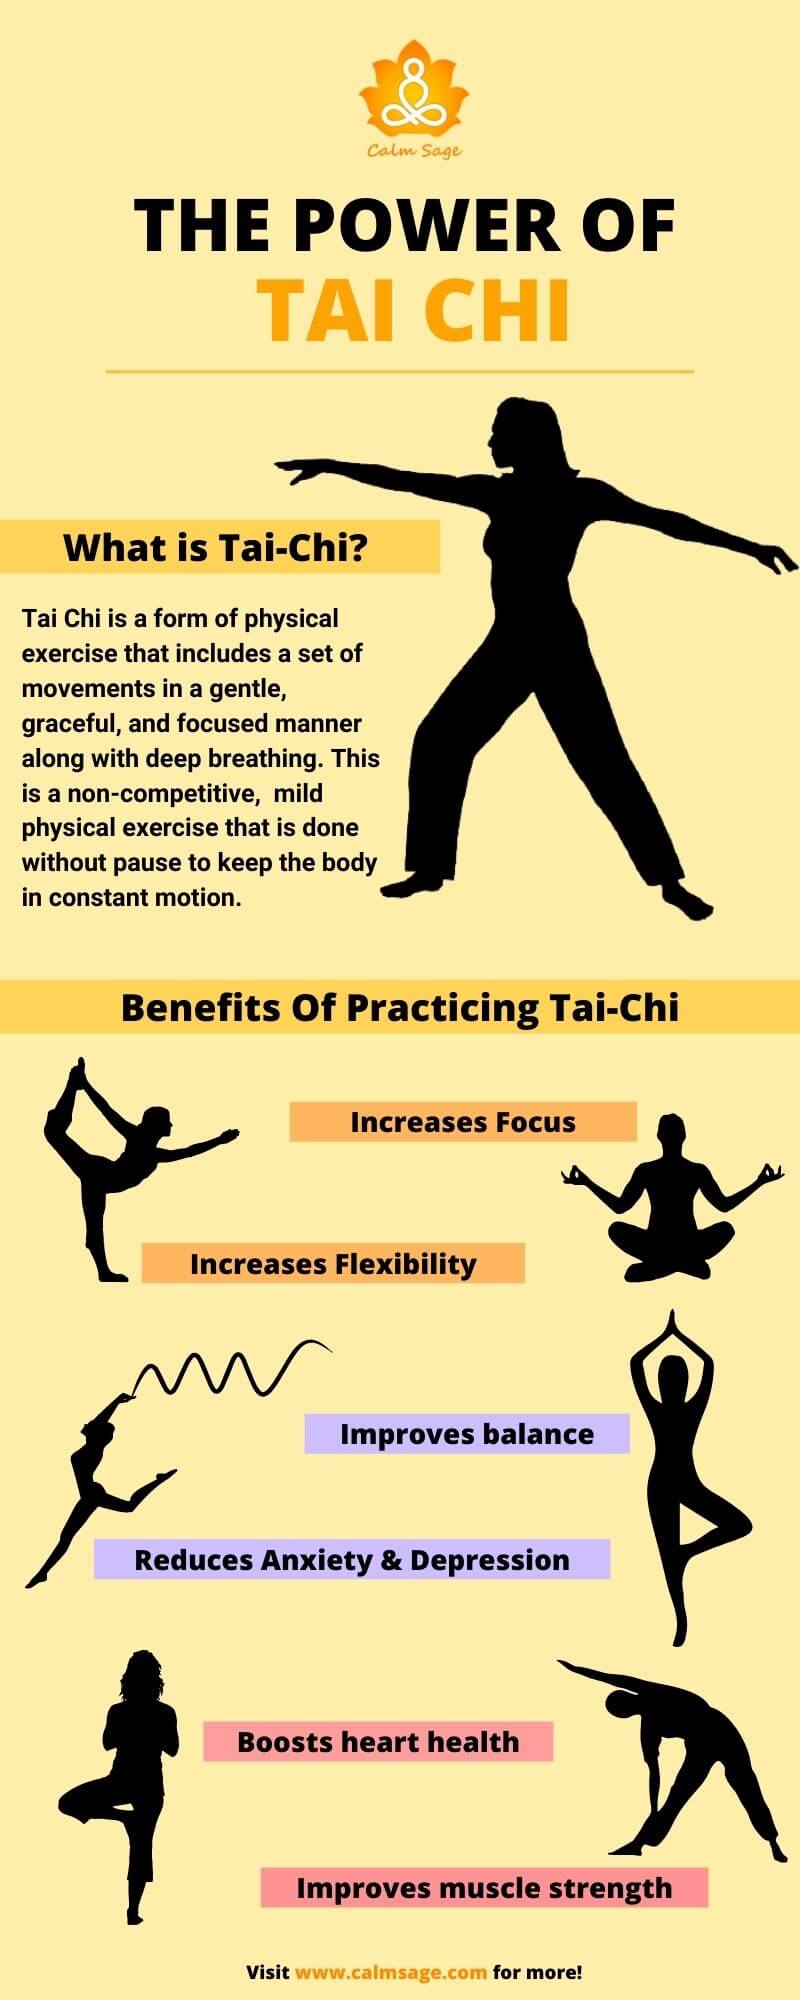 Why Tai Chi Is the Perfect Way to Reduce Stress This Monday